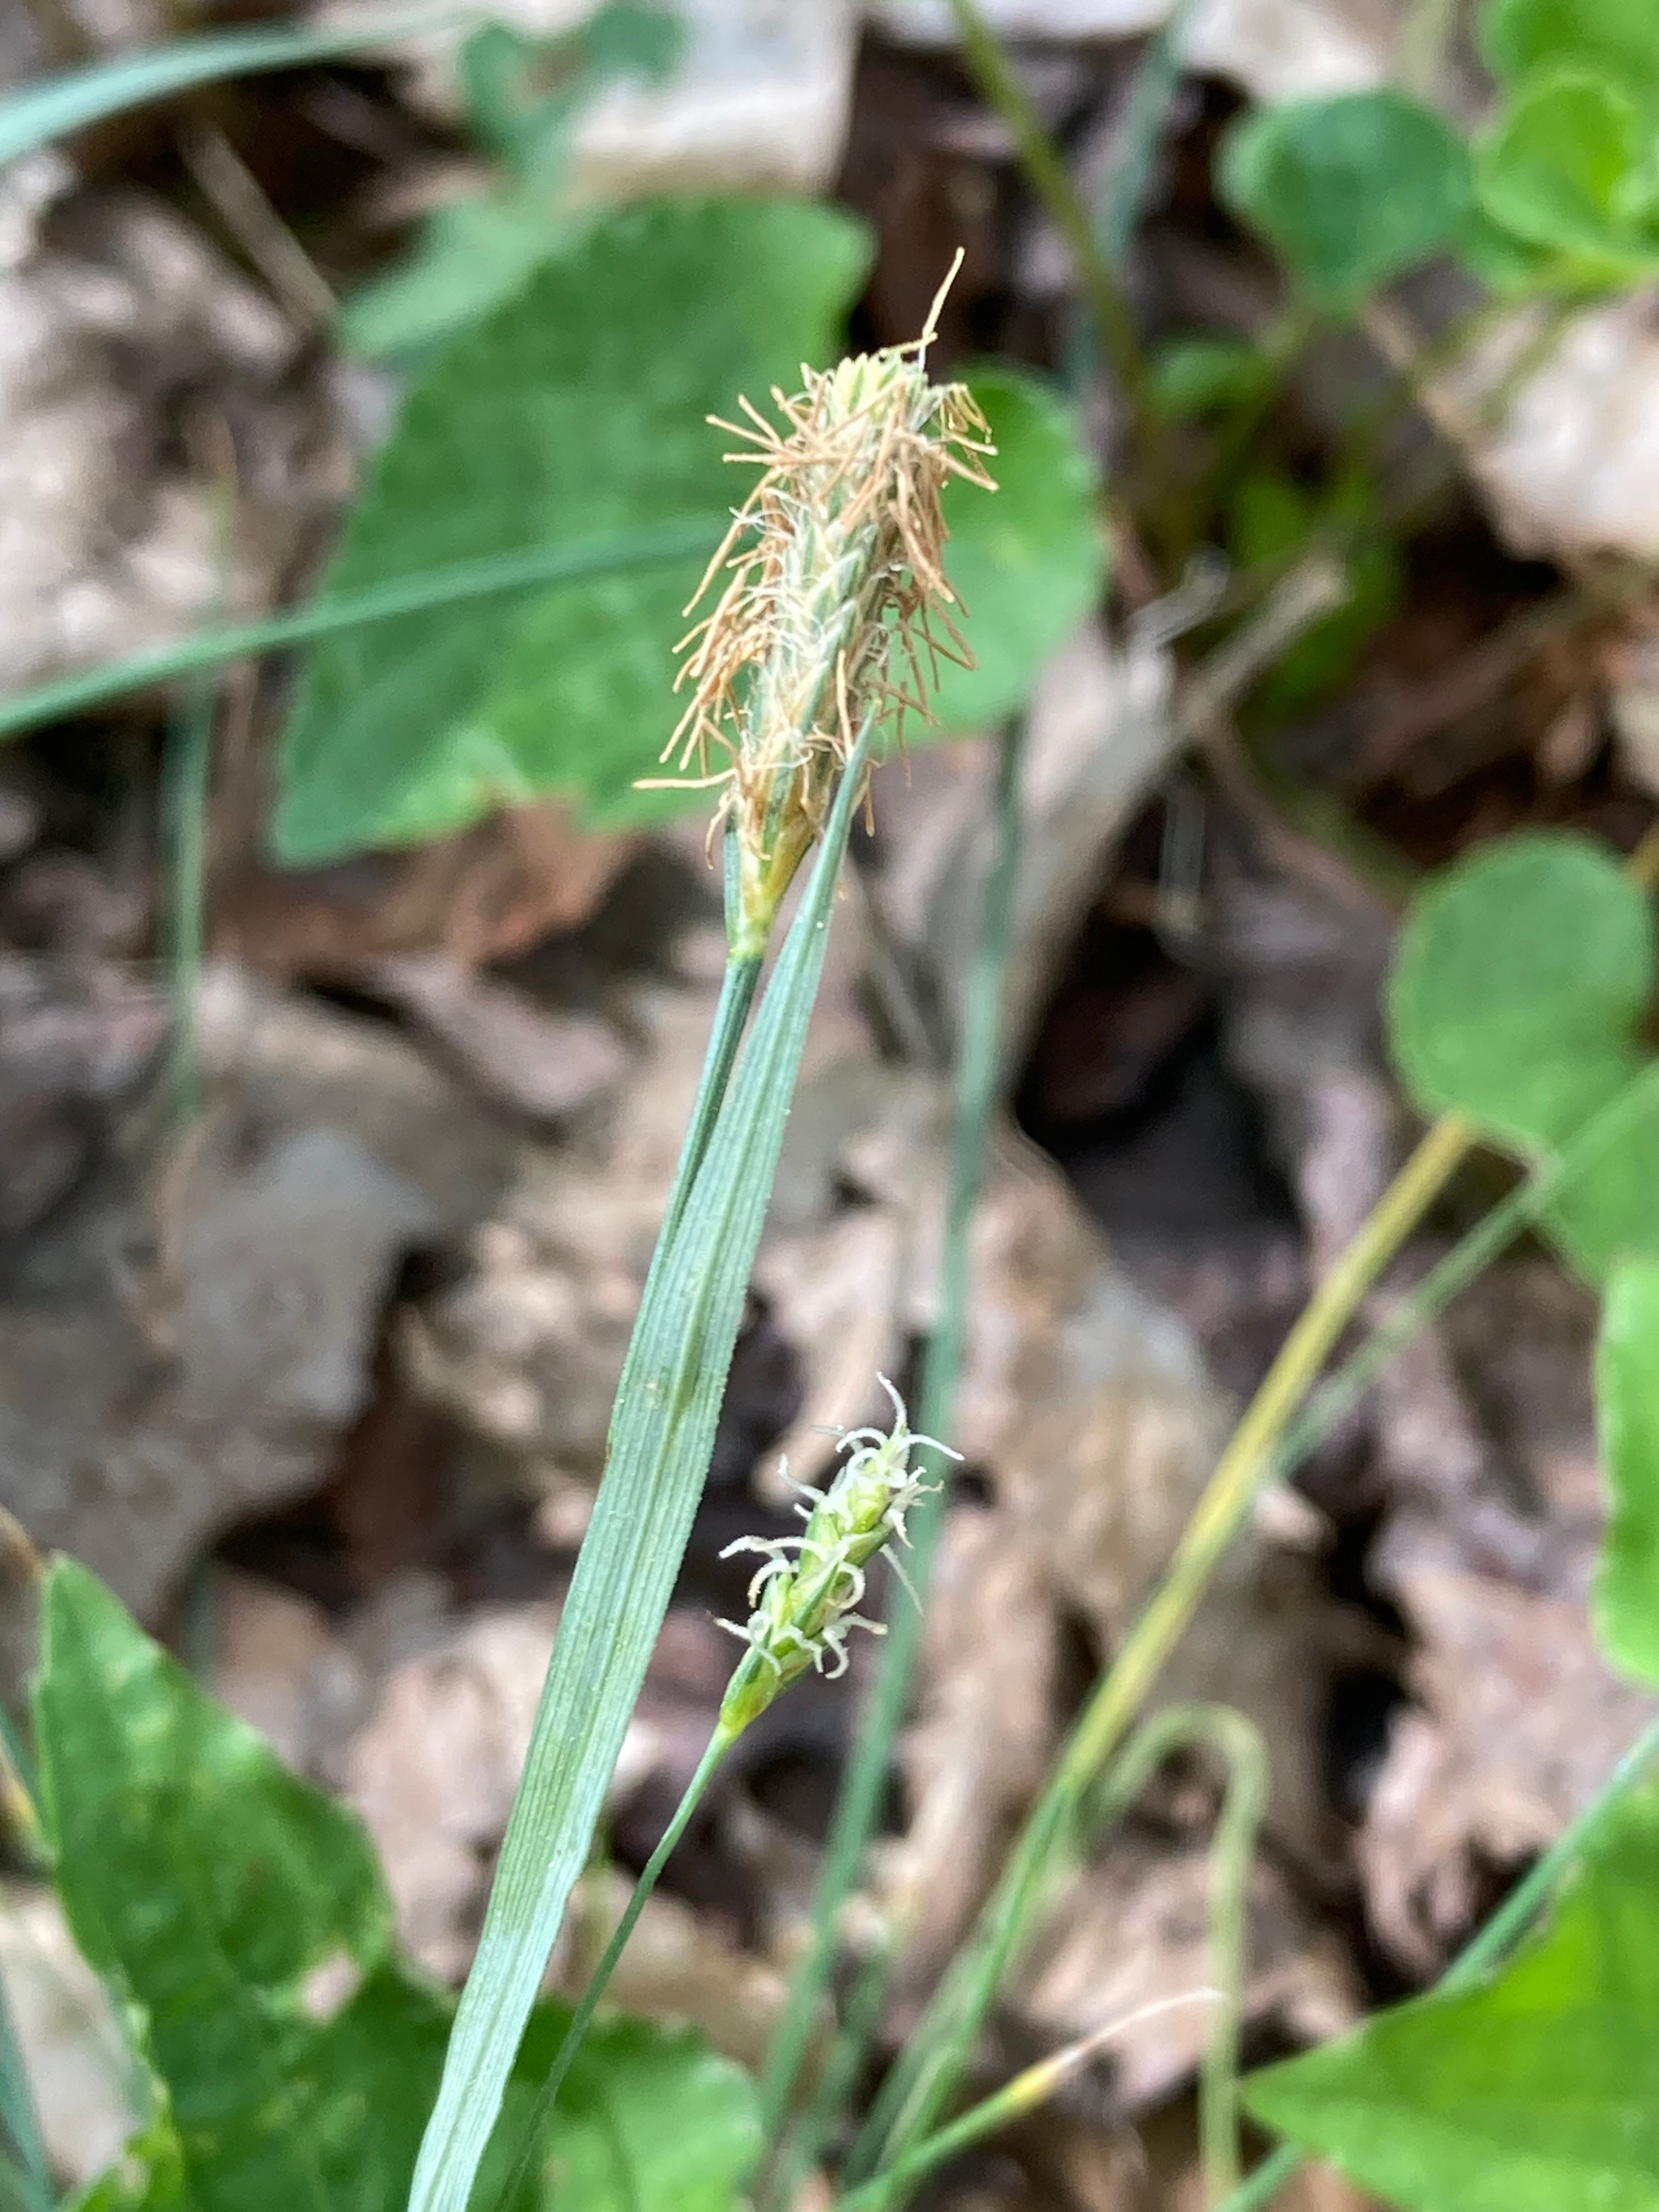 The Scientific Name is Carex flaccosperma. You will likely hear them called Meadow Sedge, Blue Wood Sedge. This picture shows the Male (top) and female (below) spikelets in early spring. of Carex flaccosperma